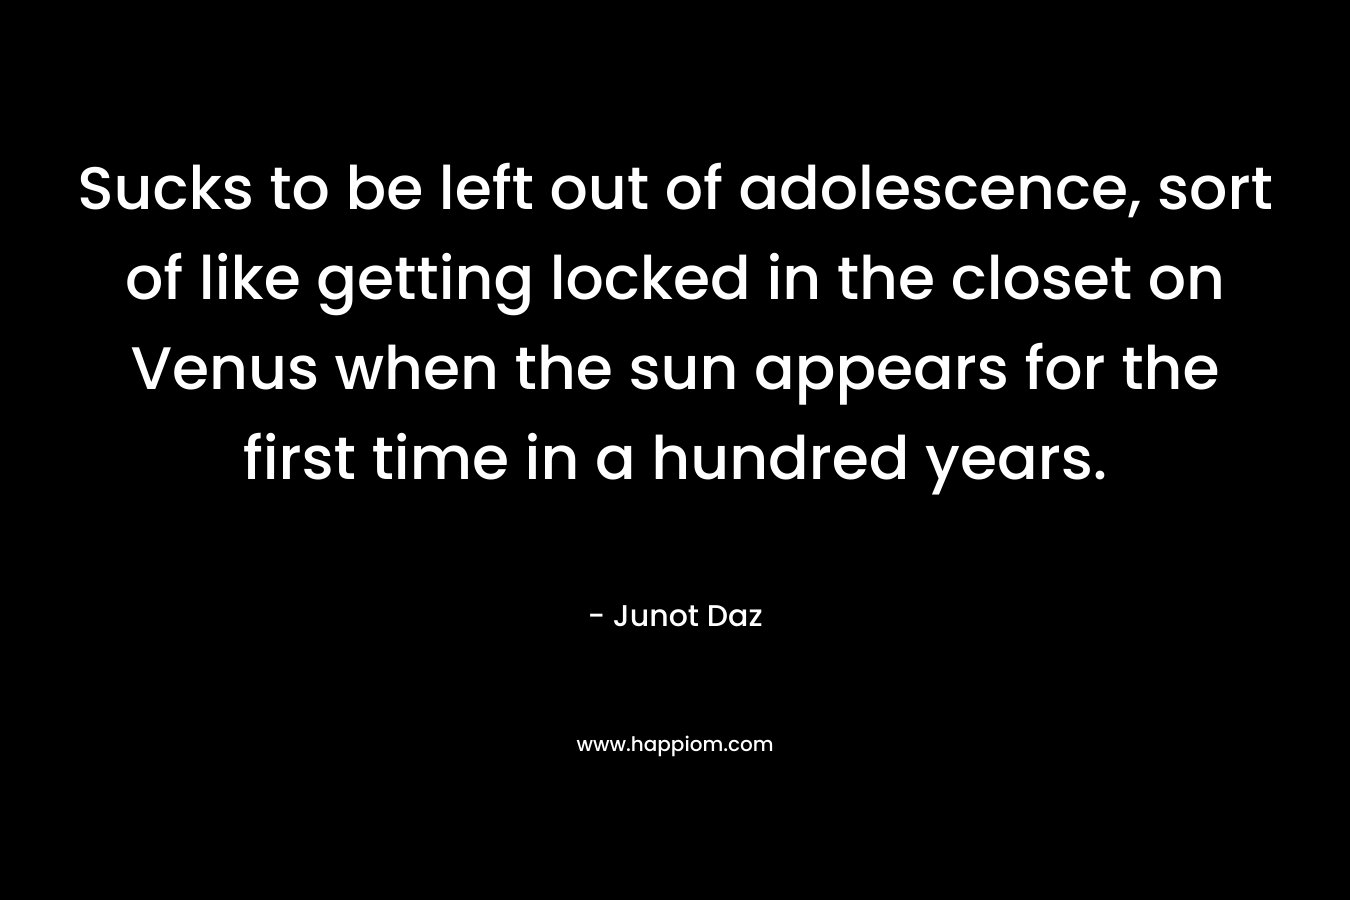 Sucks to be left out of adolescence, sort of like getting locked in the closet on Venus when the sun appears for the first time in a hundred years. – Junot Daz